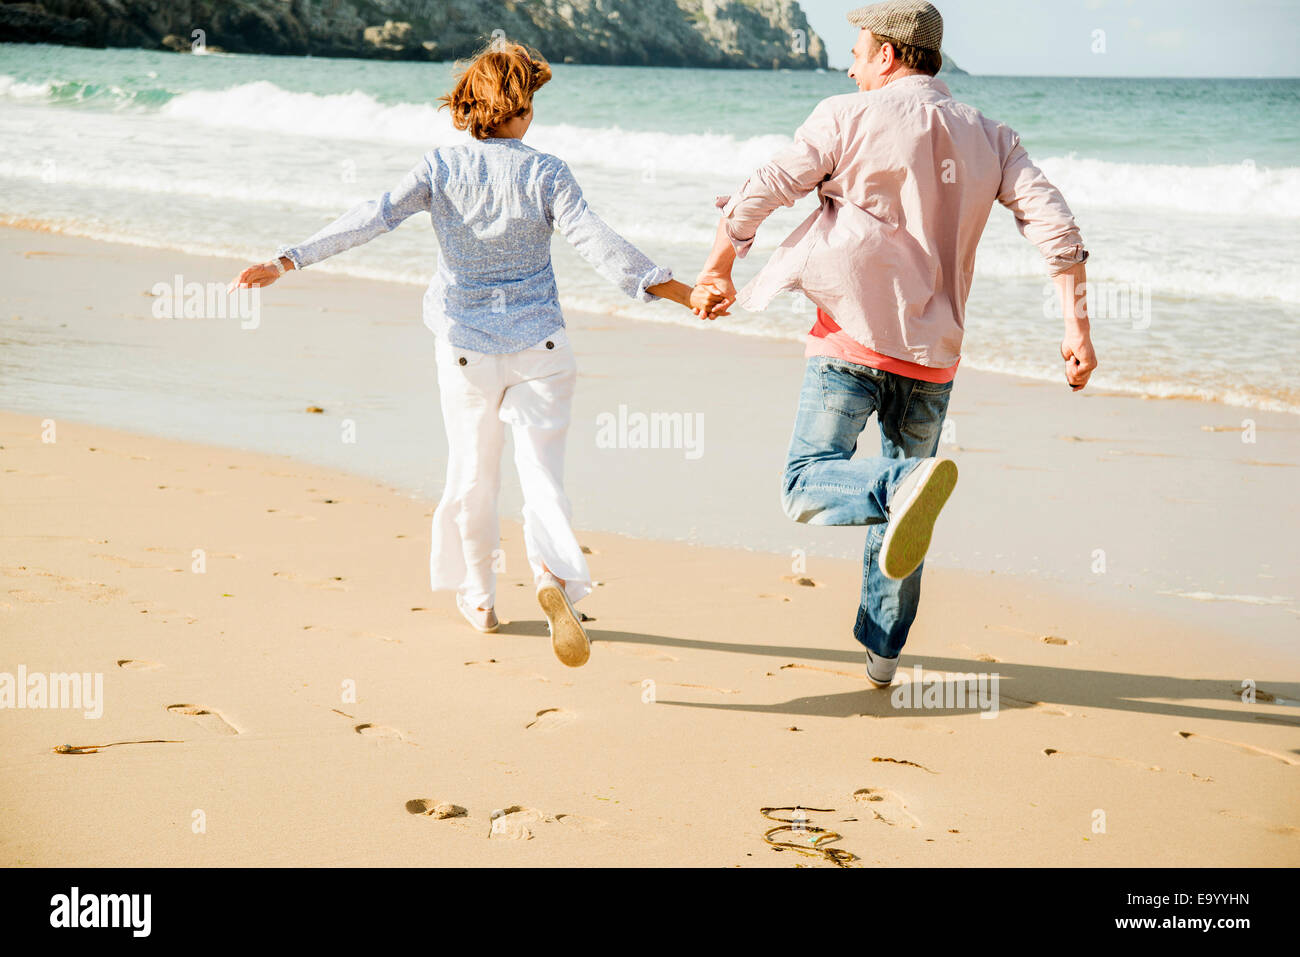 Young couple holding hands running on beach, Camaret-sur-mer, Bretagne, France Banque D'Images